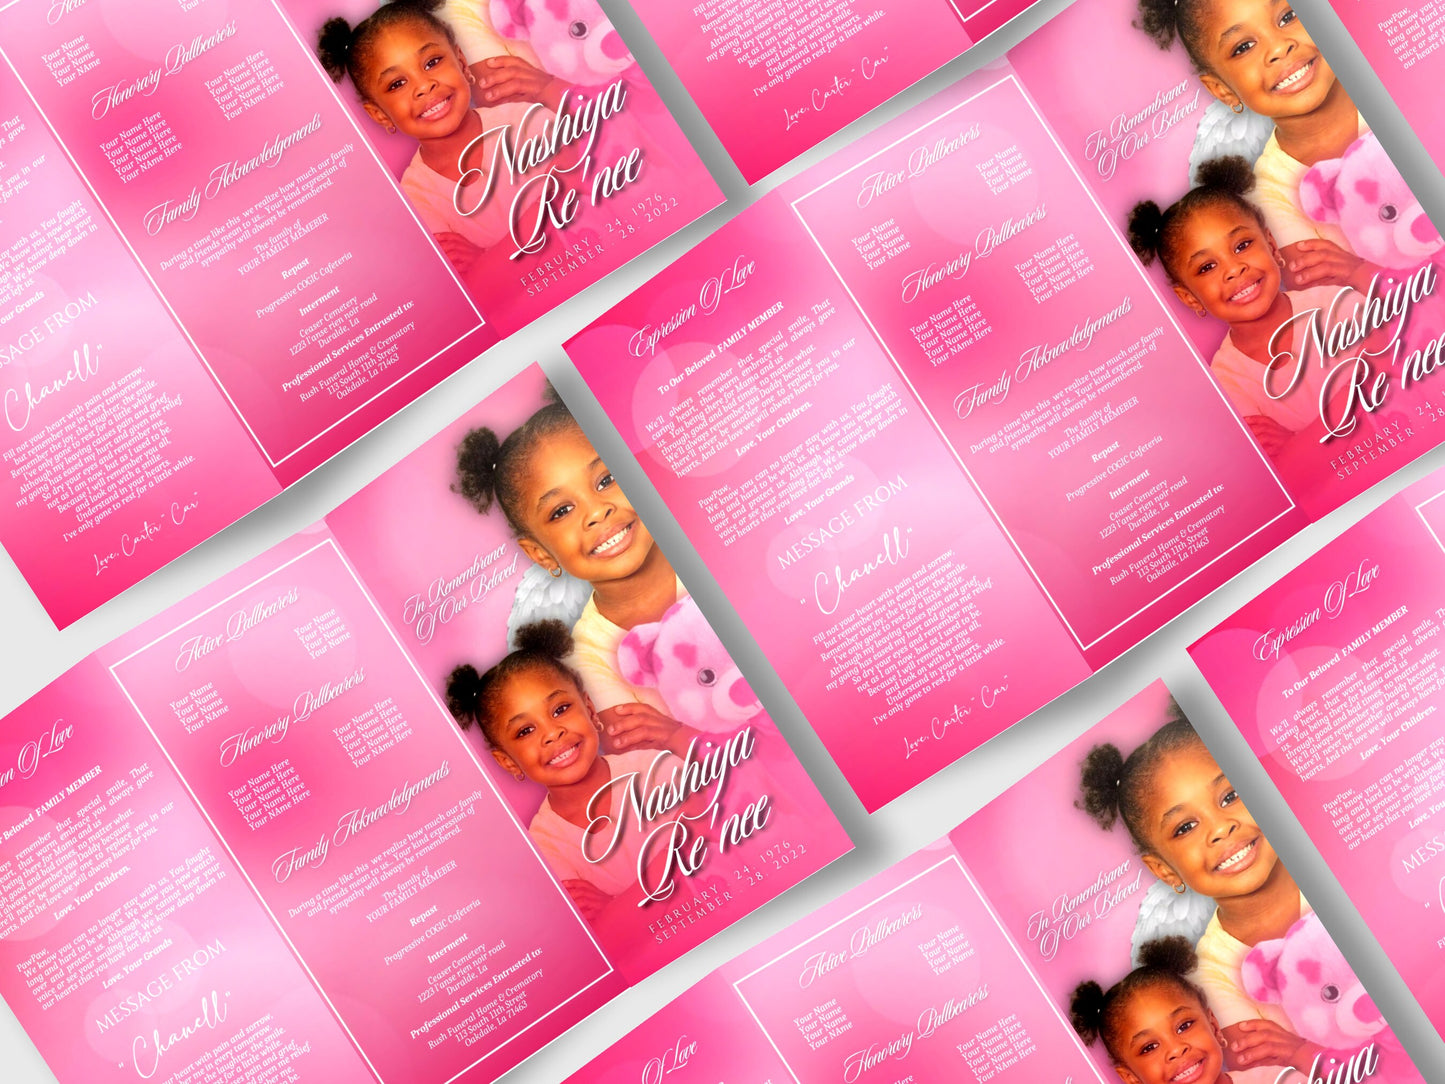 17"x11" FUNERAL OBITUARY TEMPLATE (2 pages) |Pink Flowers  Funeral Program | Celebration of Life |Classy Obituary |Canva Template